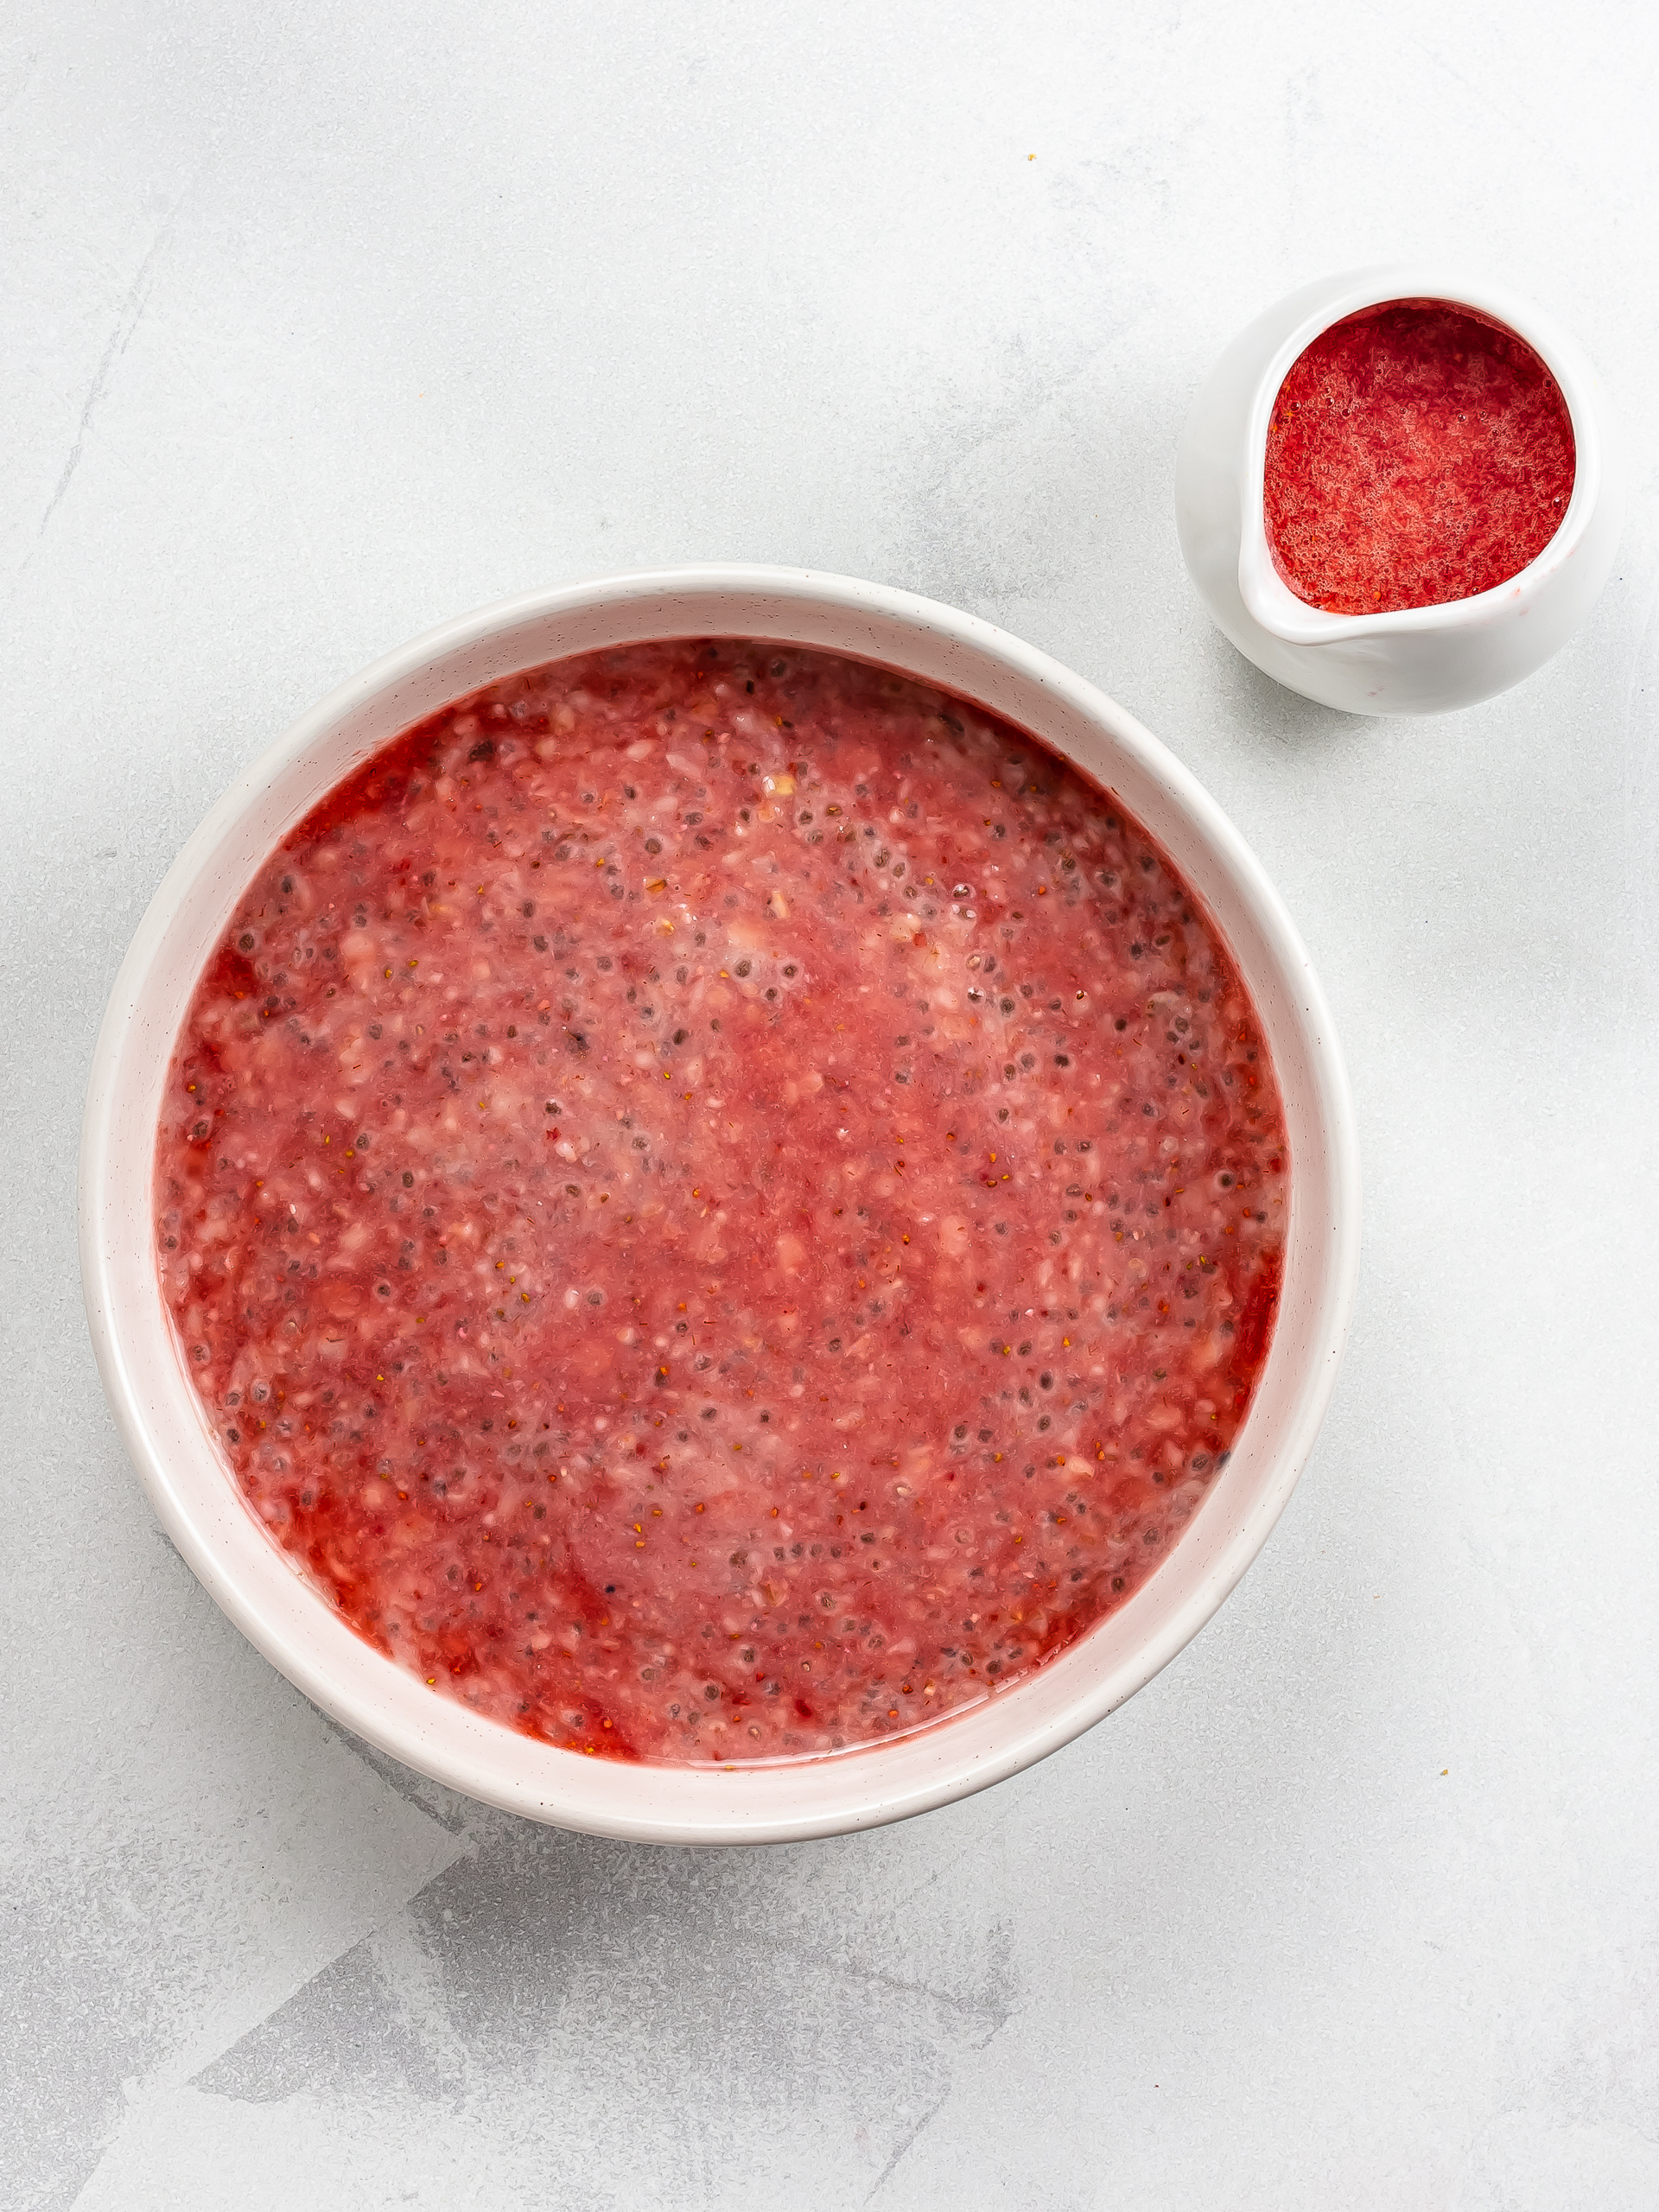 oatmeal with strawberry puree